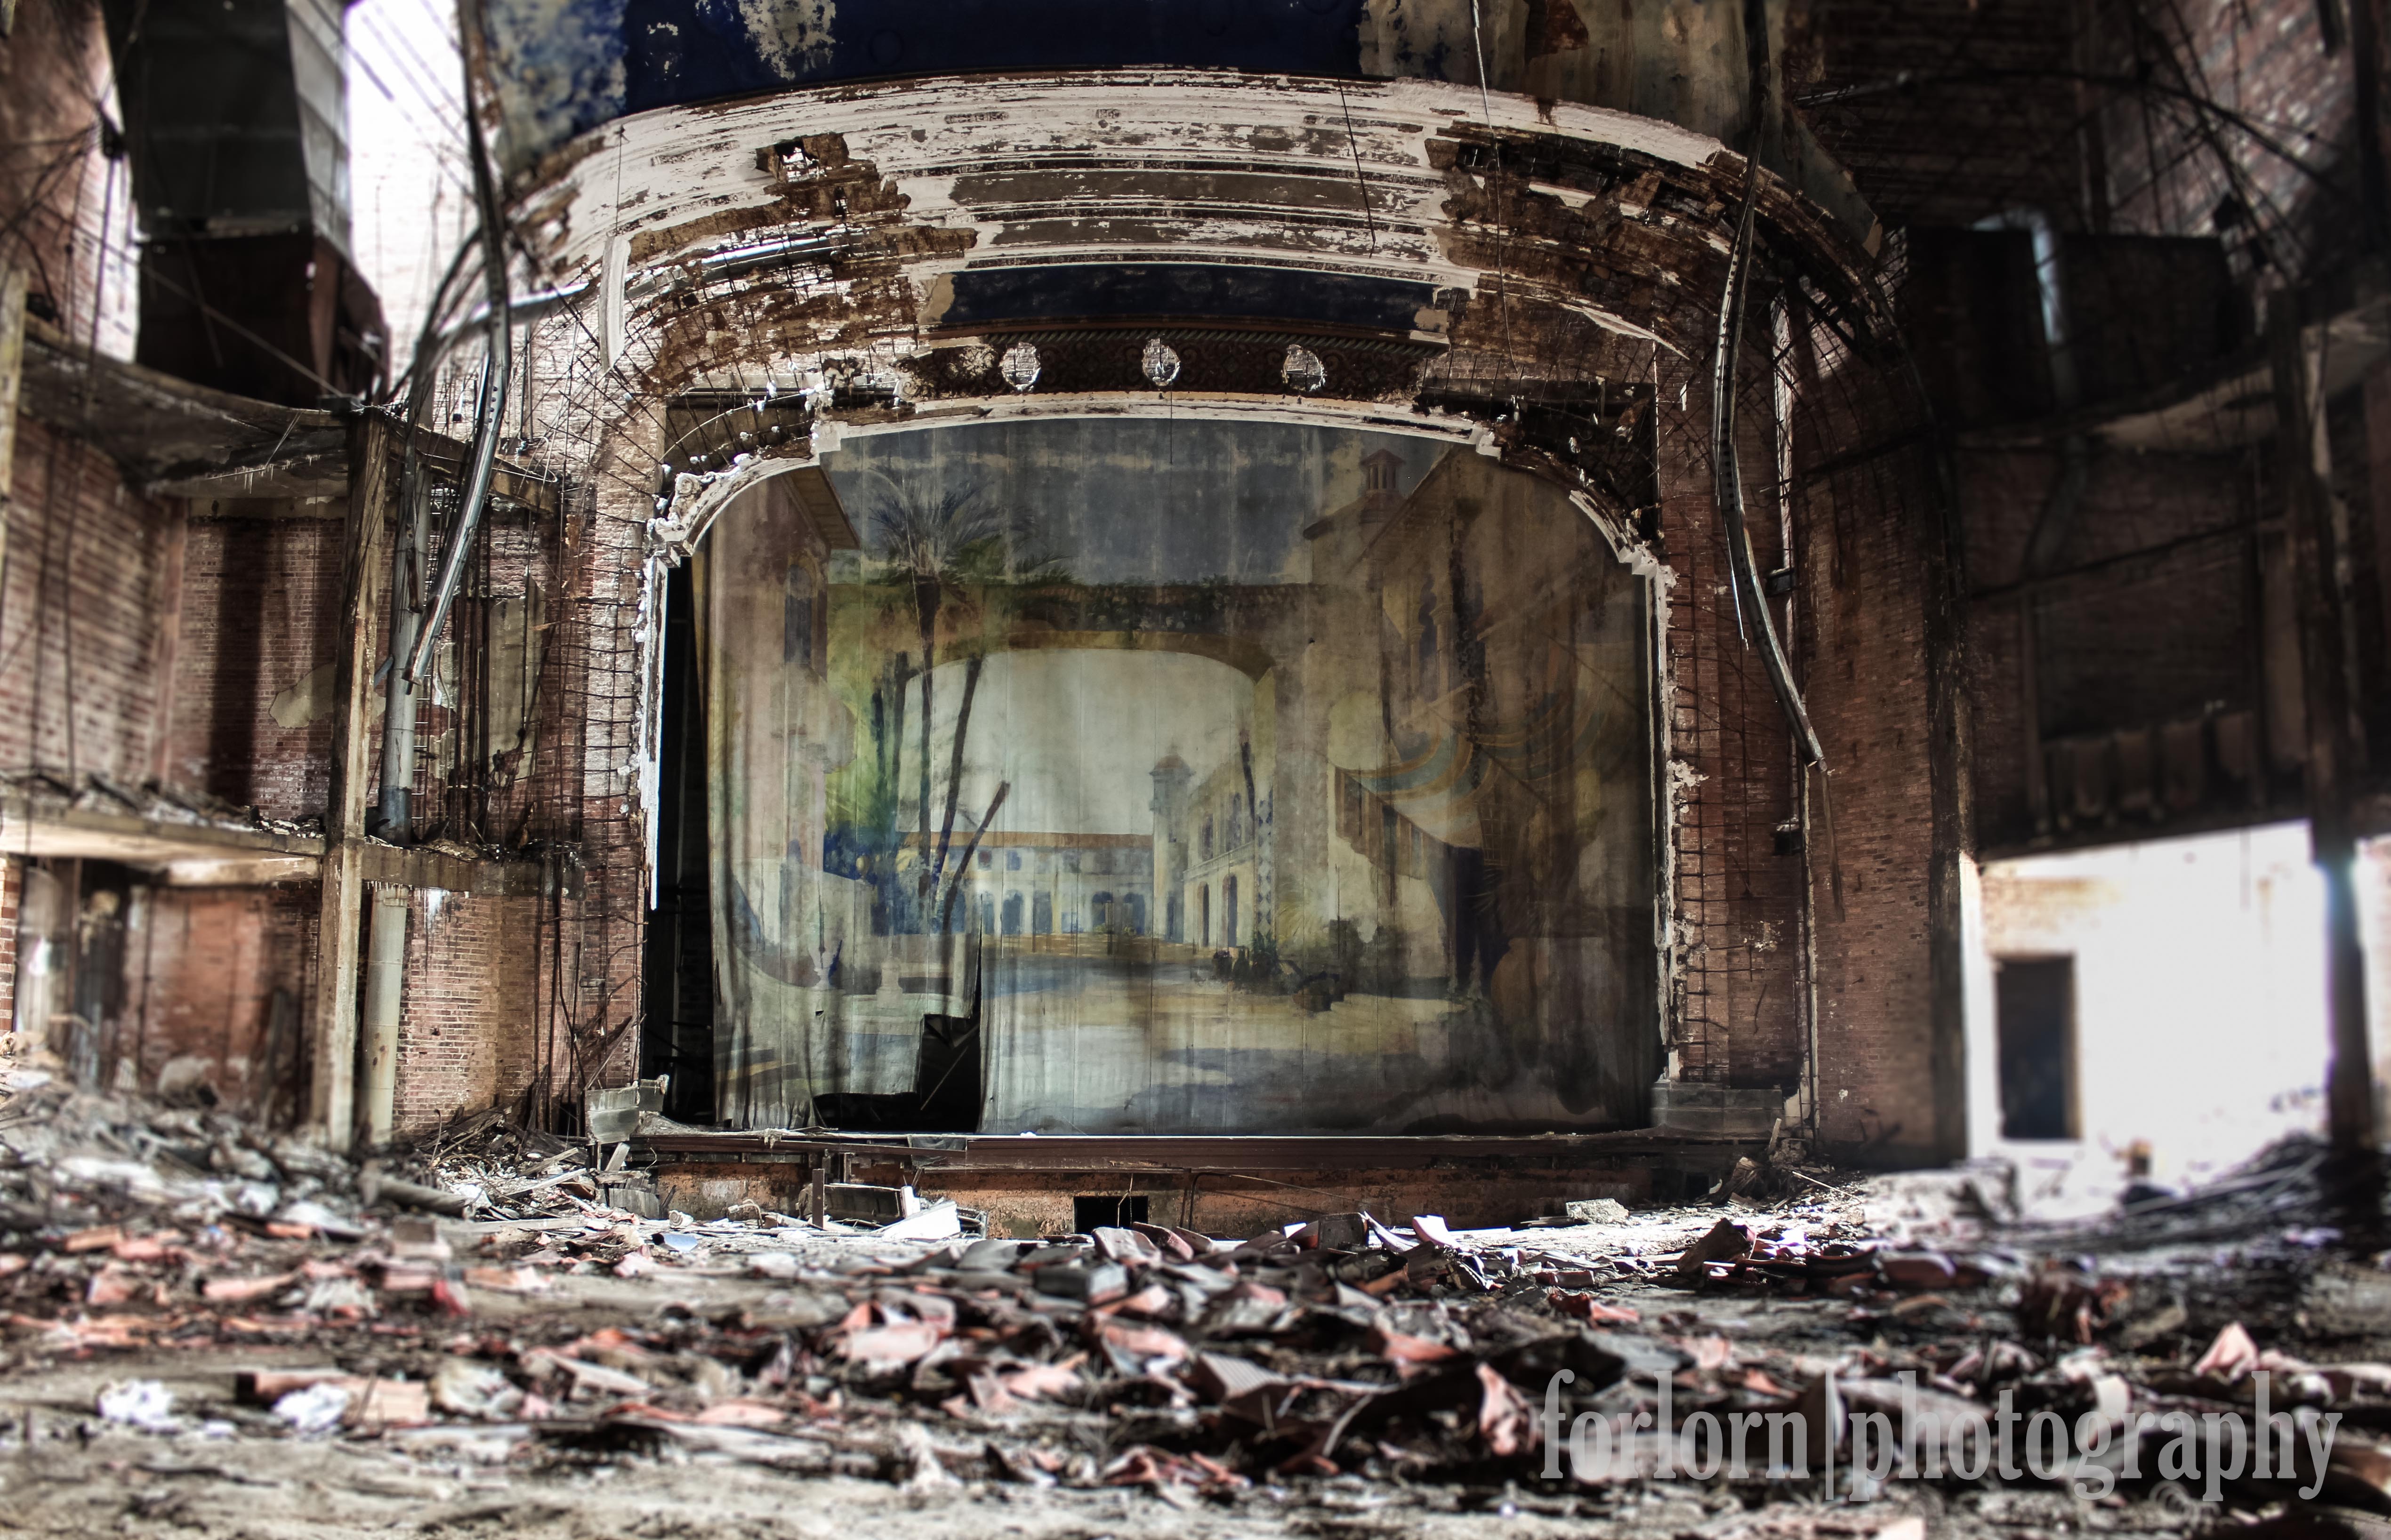 Desolate Theater – Forlorn Photography